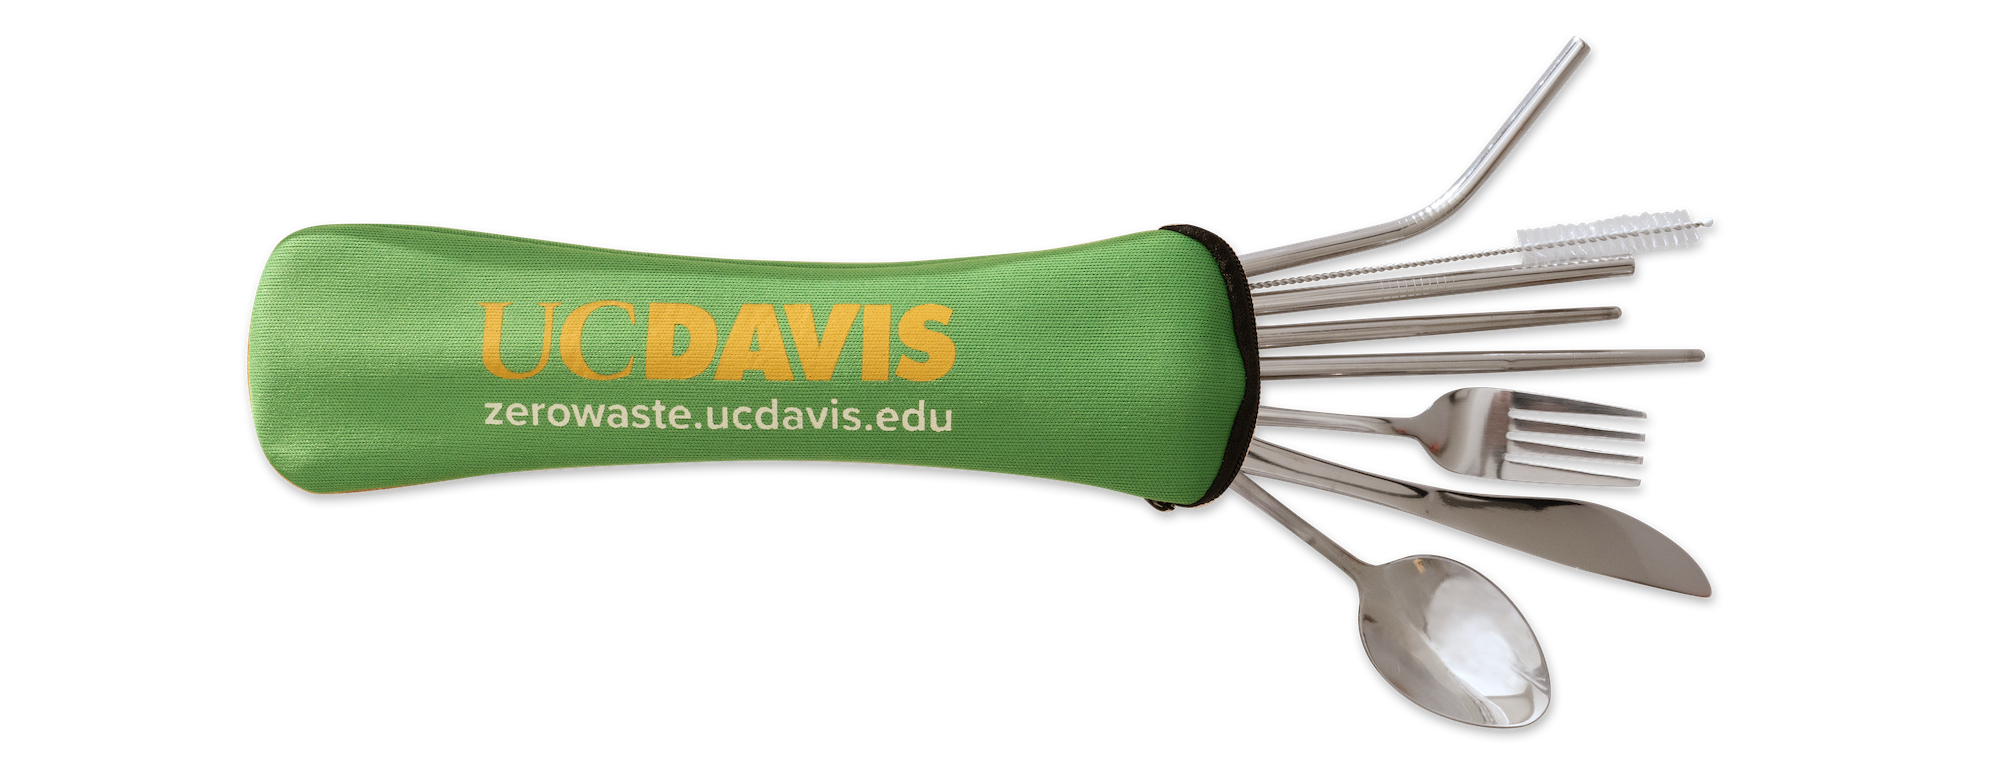 Reusable utensils, including two straws, a straw cleaner, a pair of chopsticks, a knife, a spoon and a fork